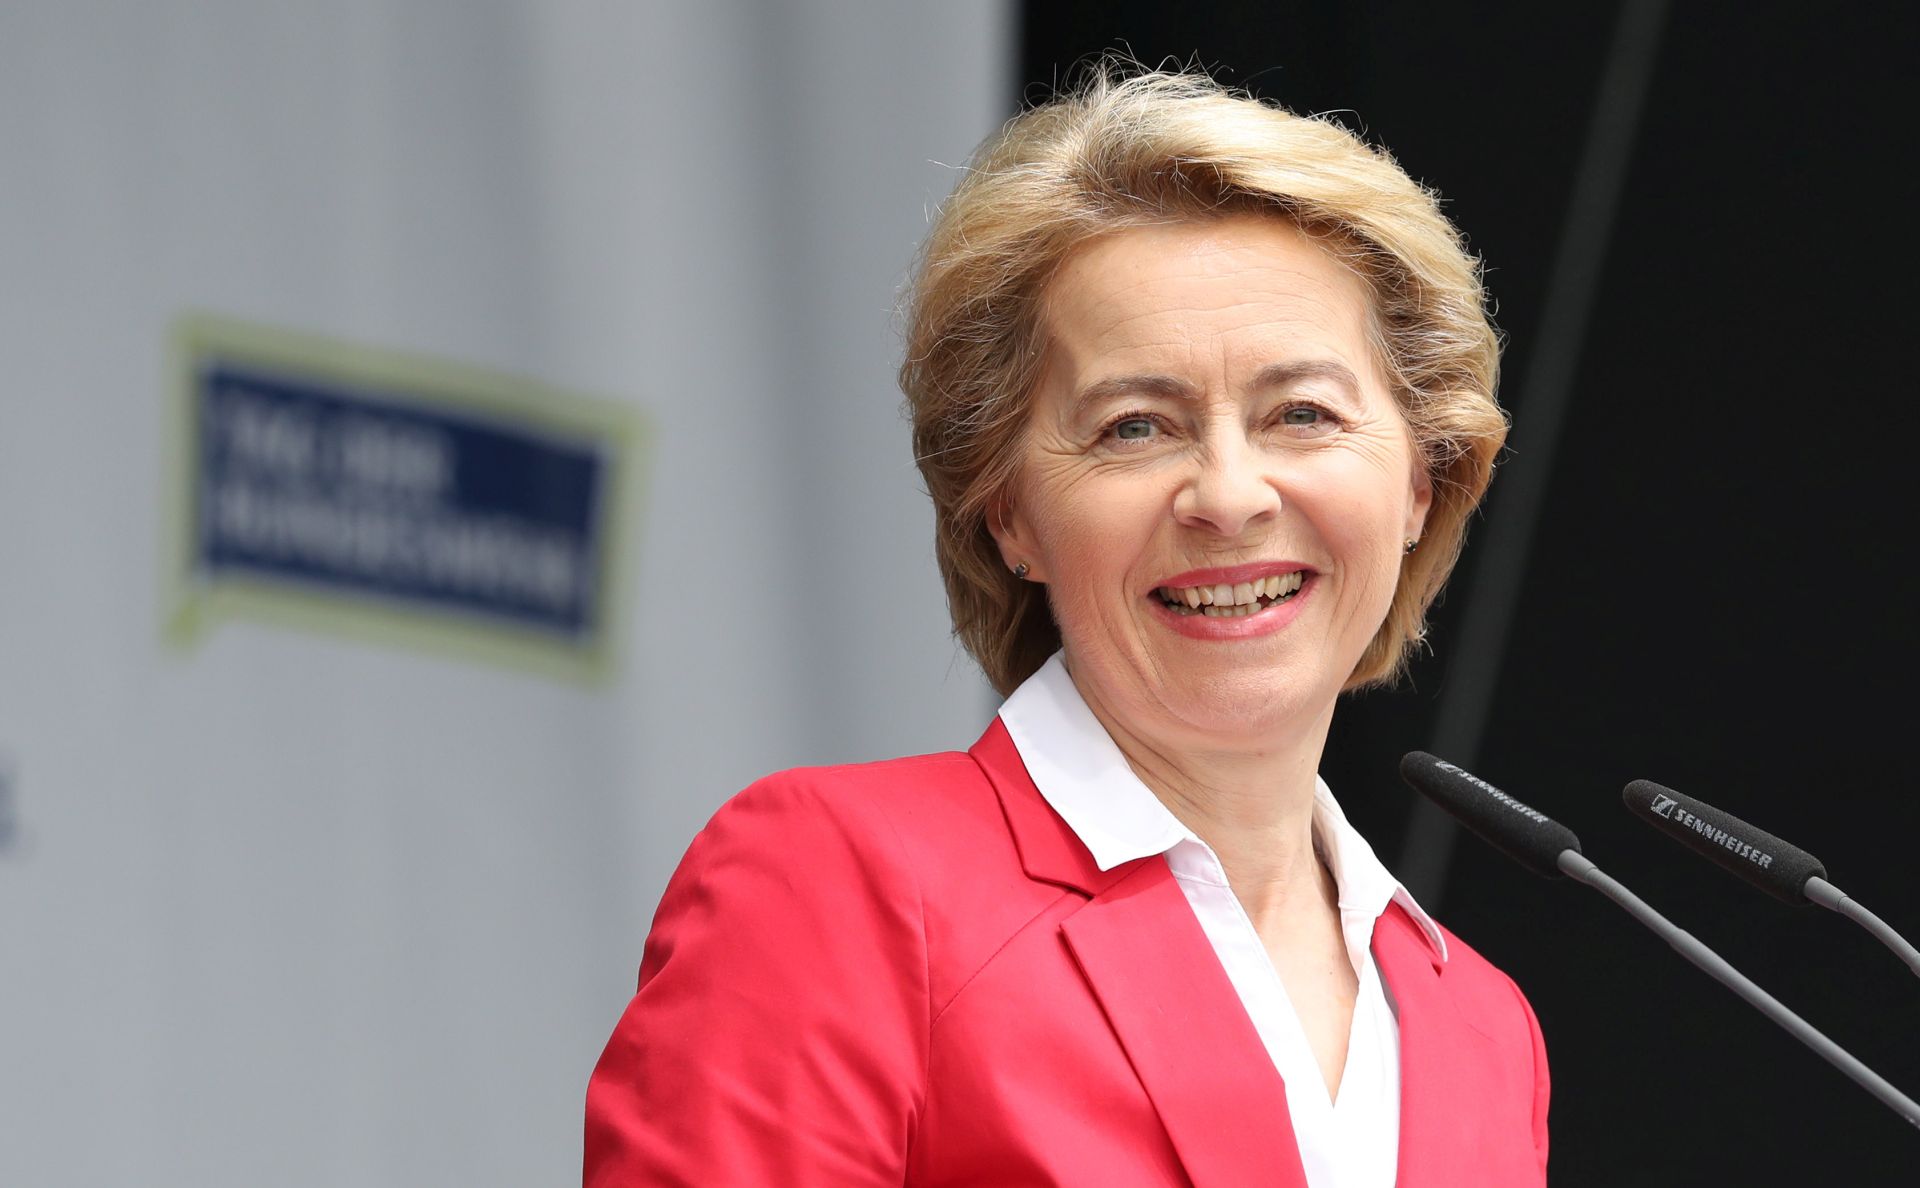 epa07718860 (FILE) - German Minister of Defense, Ursula von der Leyen speaks  during the Open Day of the German Armed Forces (Tag der Bundeswehr) at the airfield of Fassberg, northern Germany, 15 June 2019 (reissued 15 July 2019). Media reports on 15 July 2019 state Ursula von der Leyen has announced via Twitter that she will resign from her post as German Defense Minister on 17 July 2019. A vote on von der Leyen's nomination as the head of the European Commission will take place at the plenary session of the European  Parliament on 16 July.  EPA/FOCKE STRANGMANN